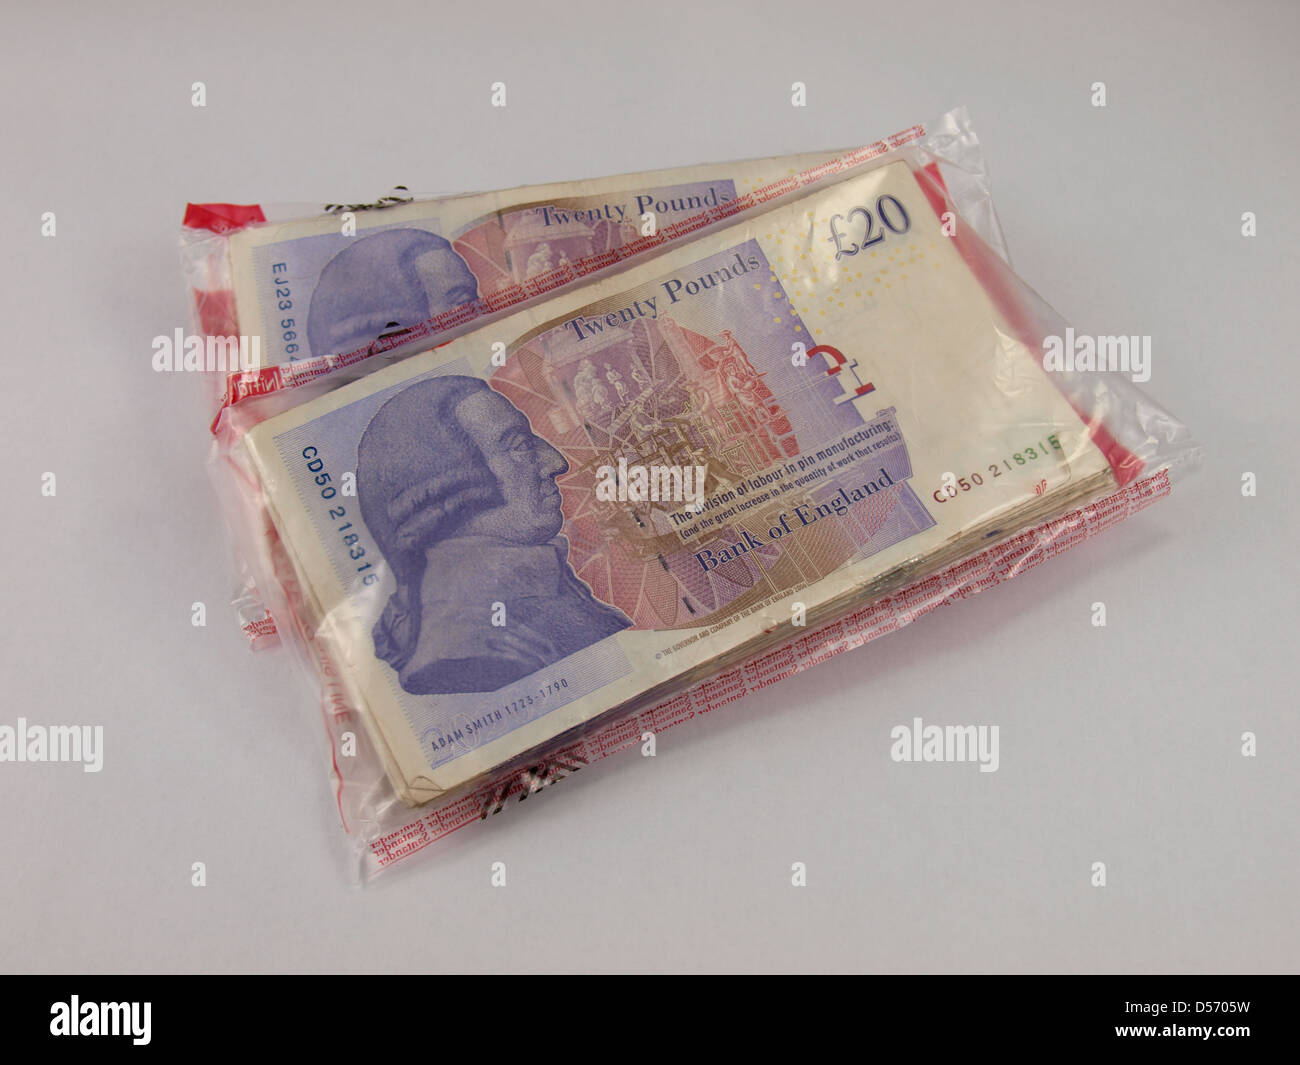 Sealed packets of £1000 in twenty pound notes from the bank, UK Stock Photo